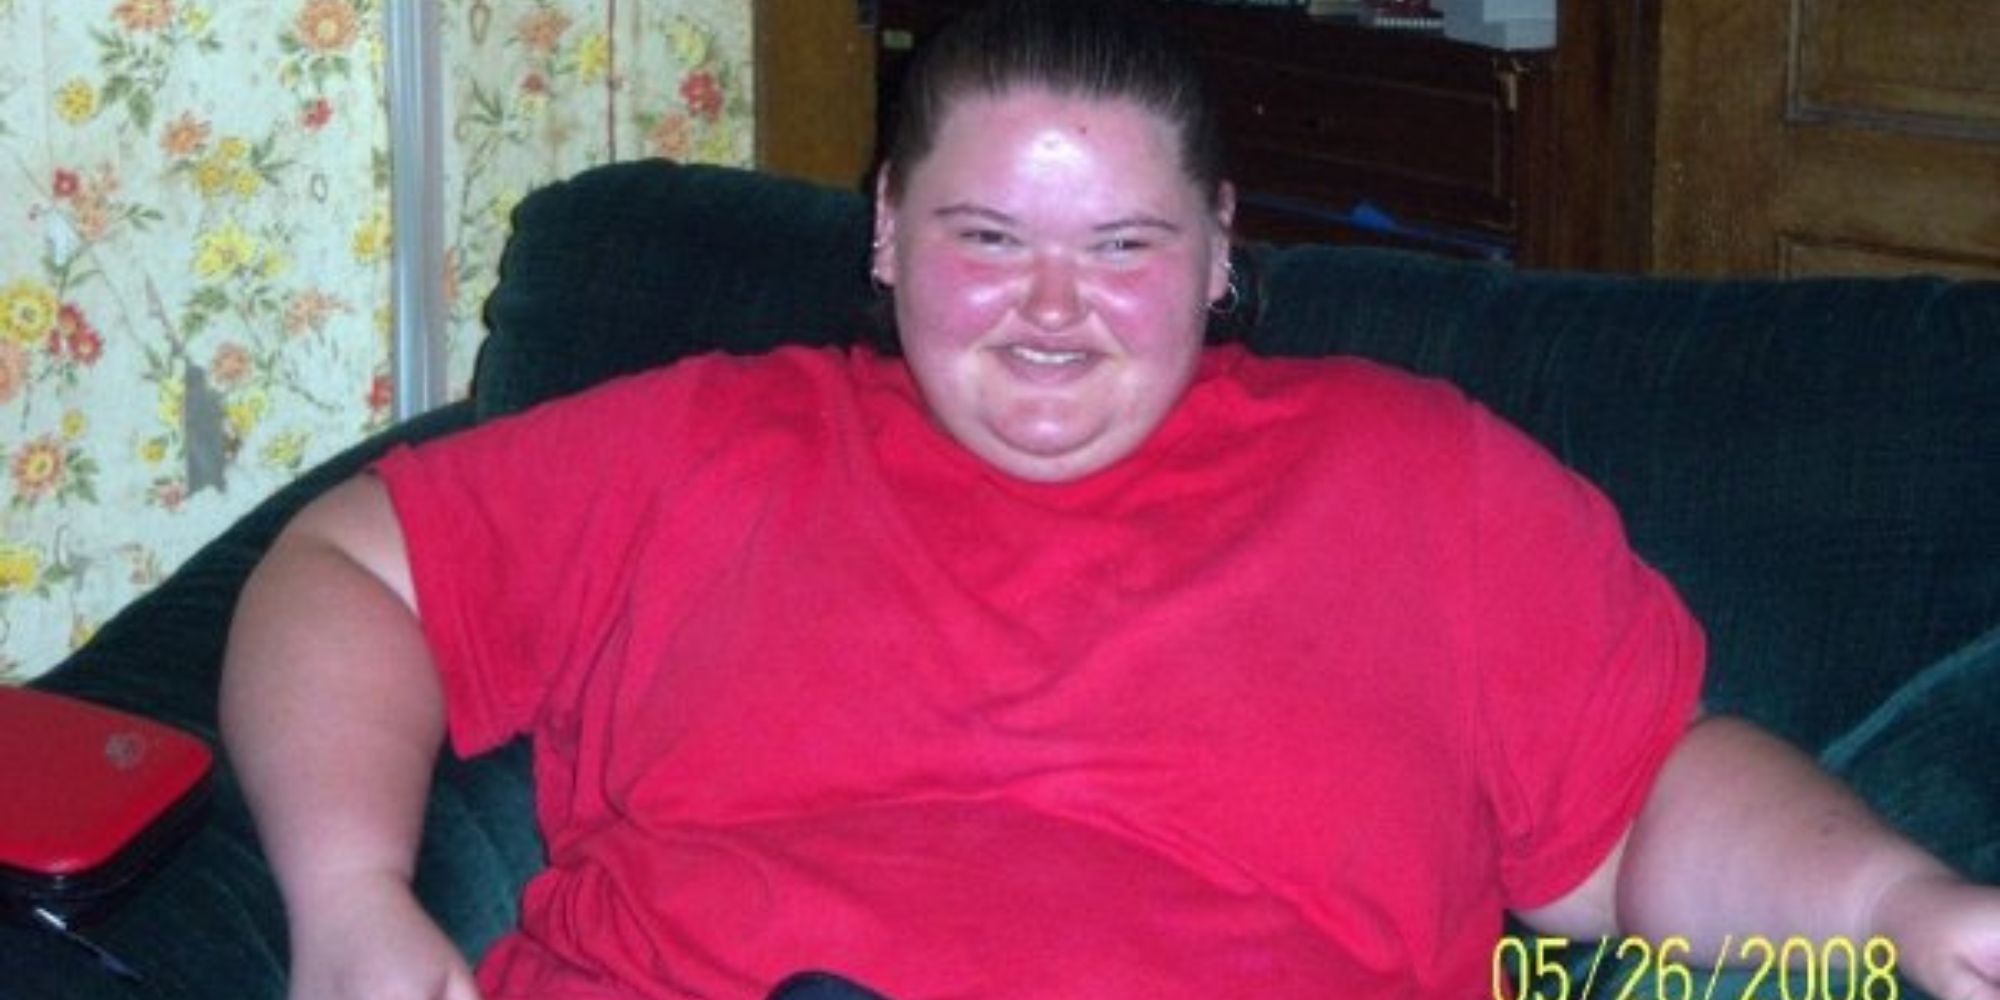 1000-lb Sisters Amy Slaton smiling, wearing red